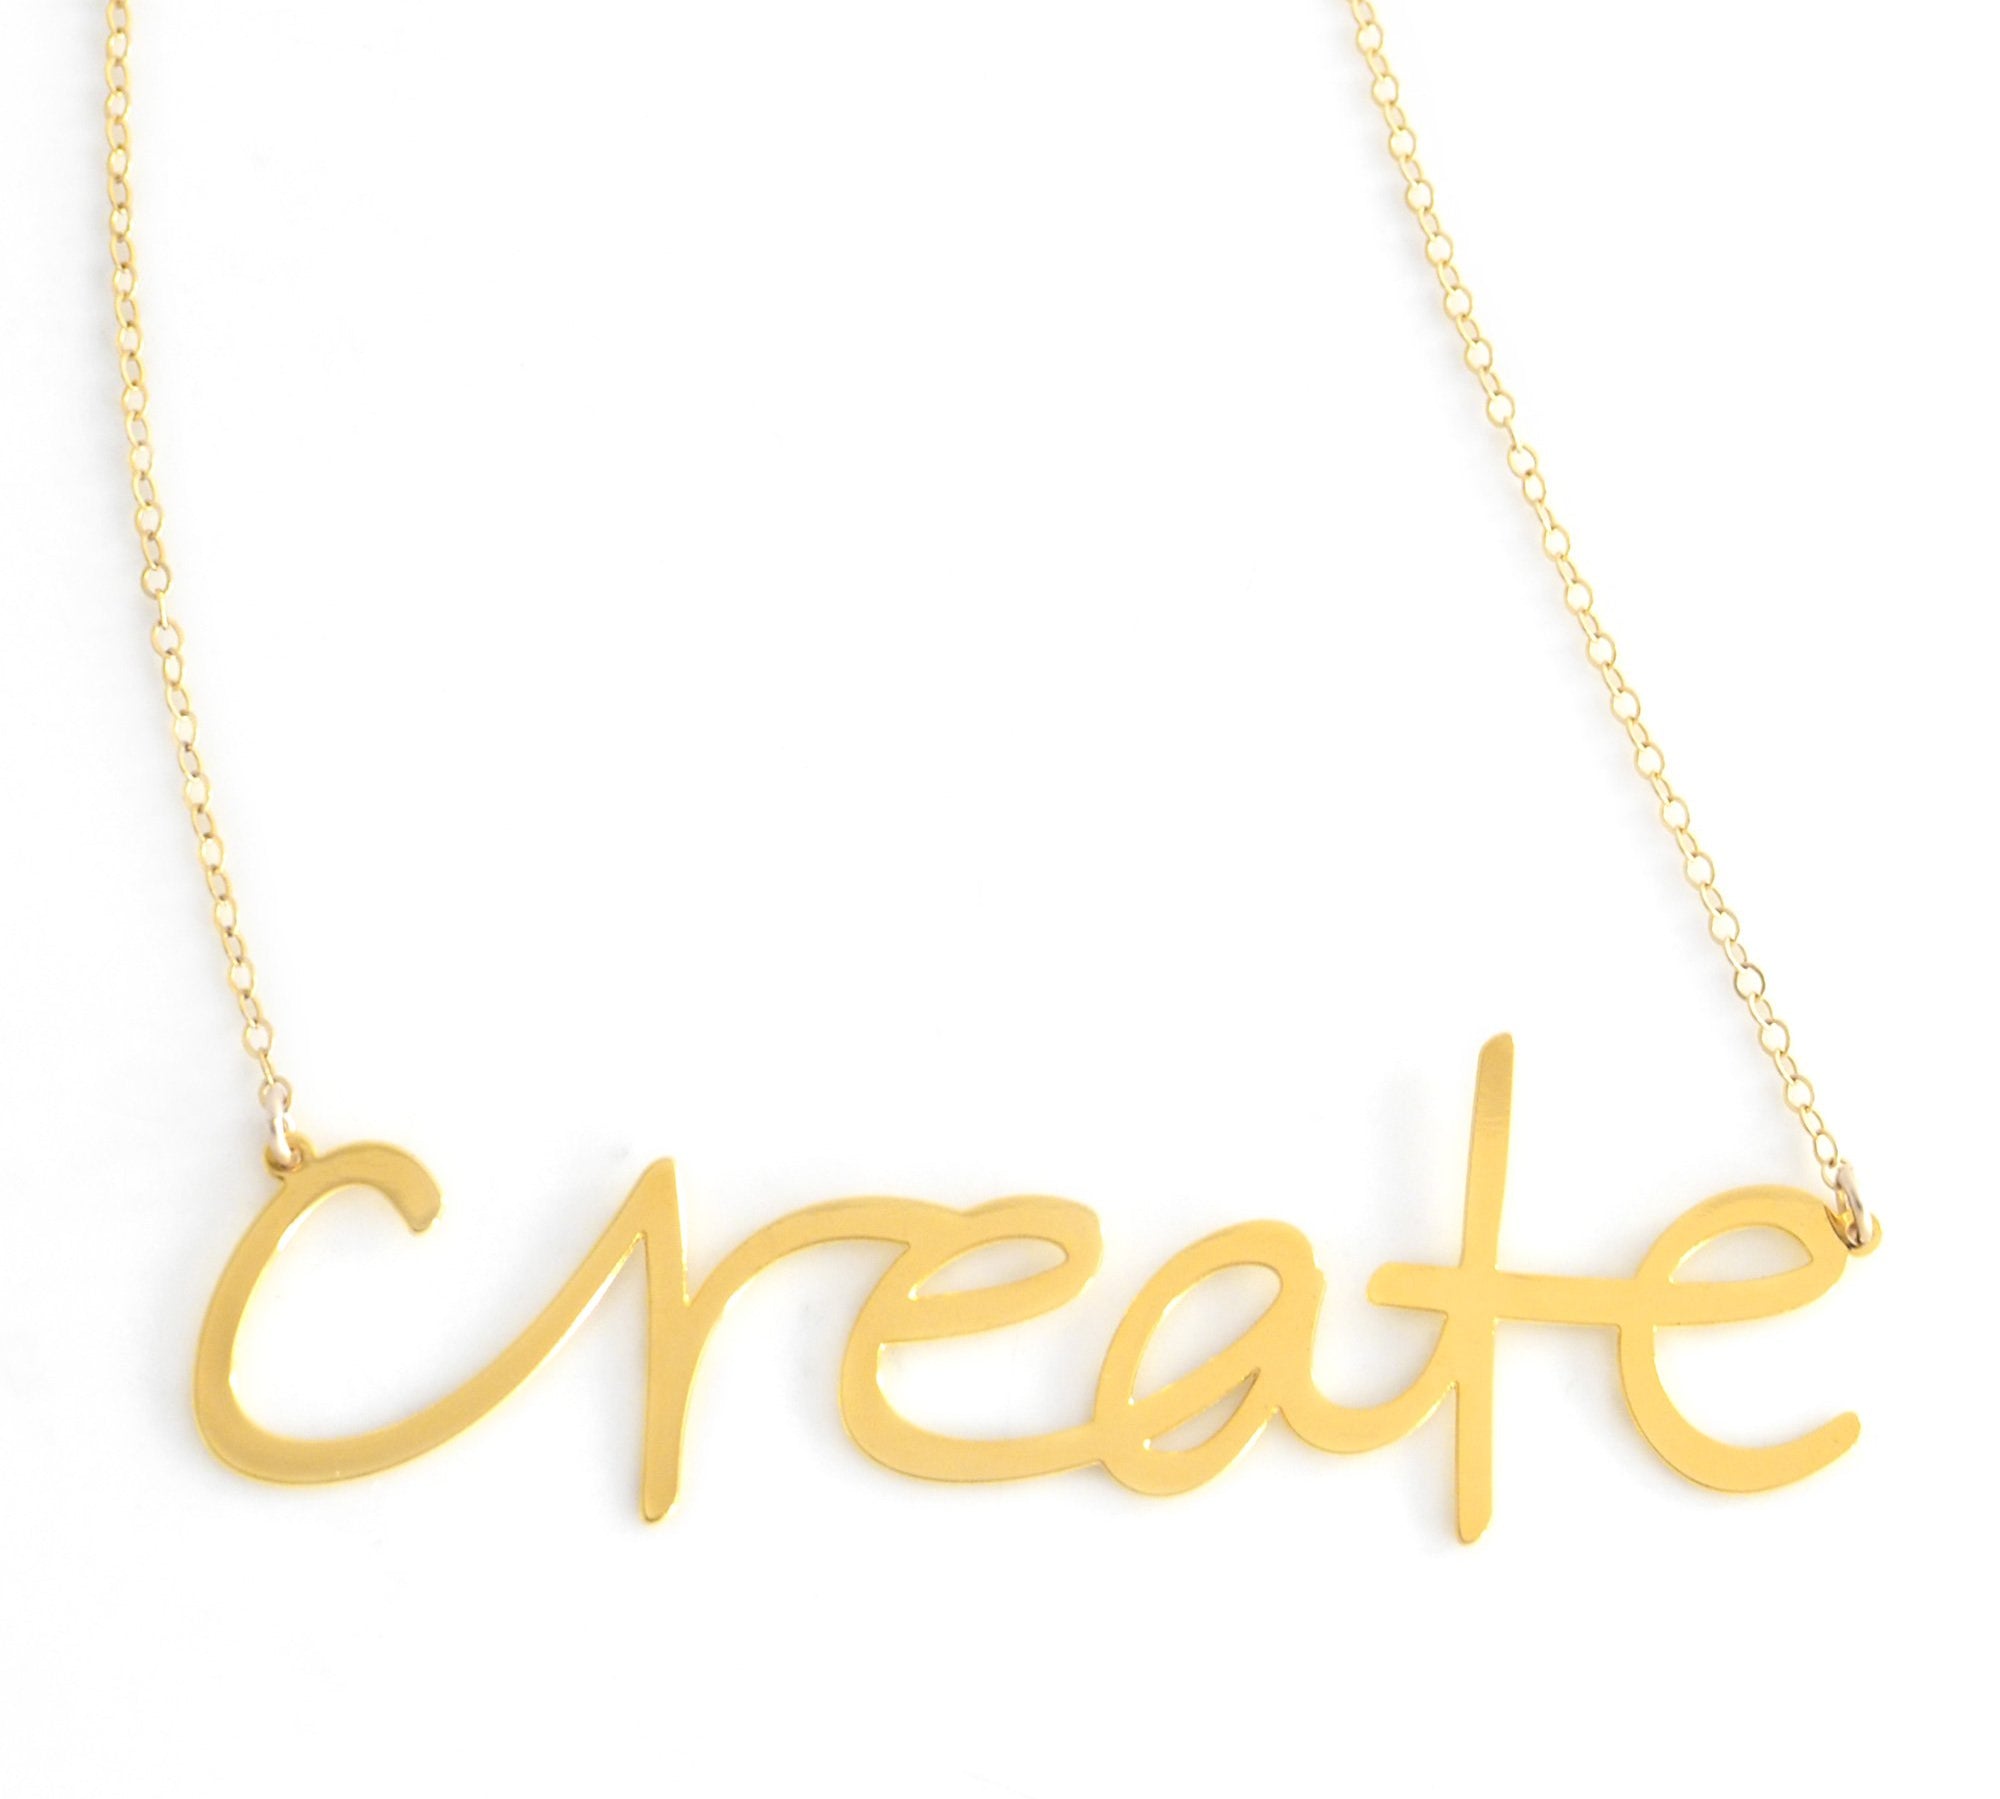 Create Necklace - High Quality, Affordable, Hand Written, Self Love, Mantra Word Necklace - Available in Gold and Silver - Small and Large Sizes - Made in USA - Brevity Jewelry